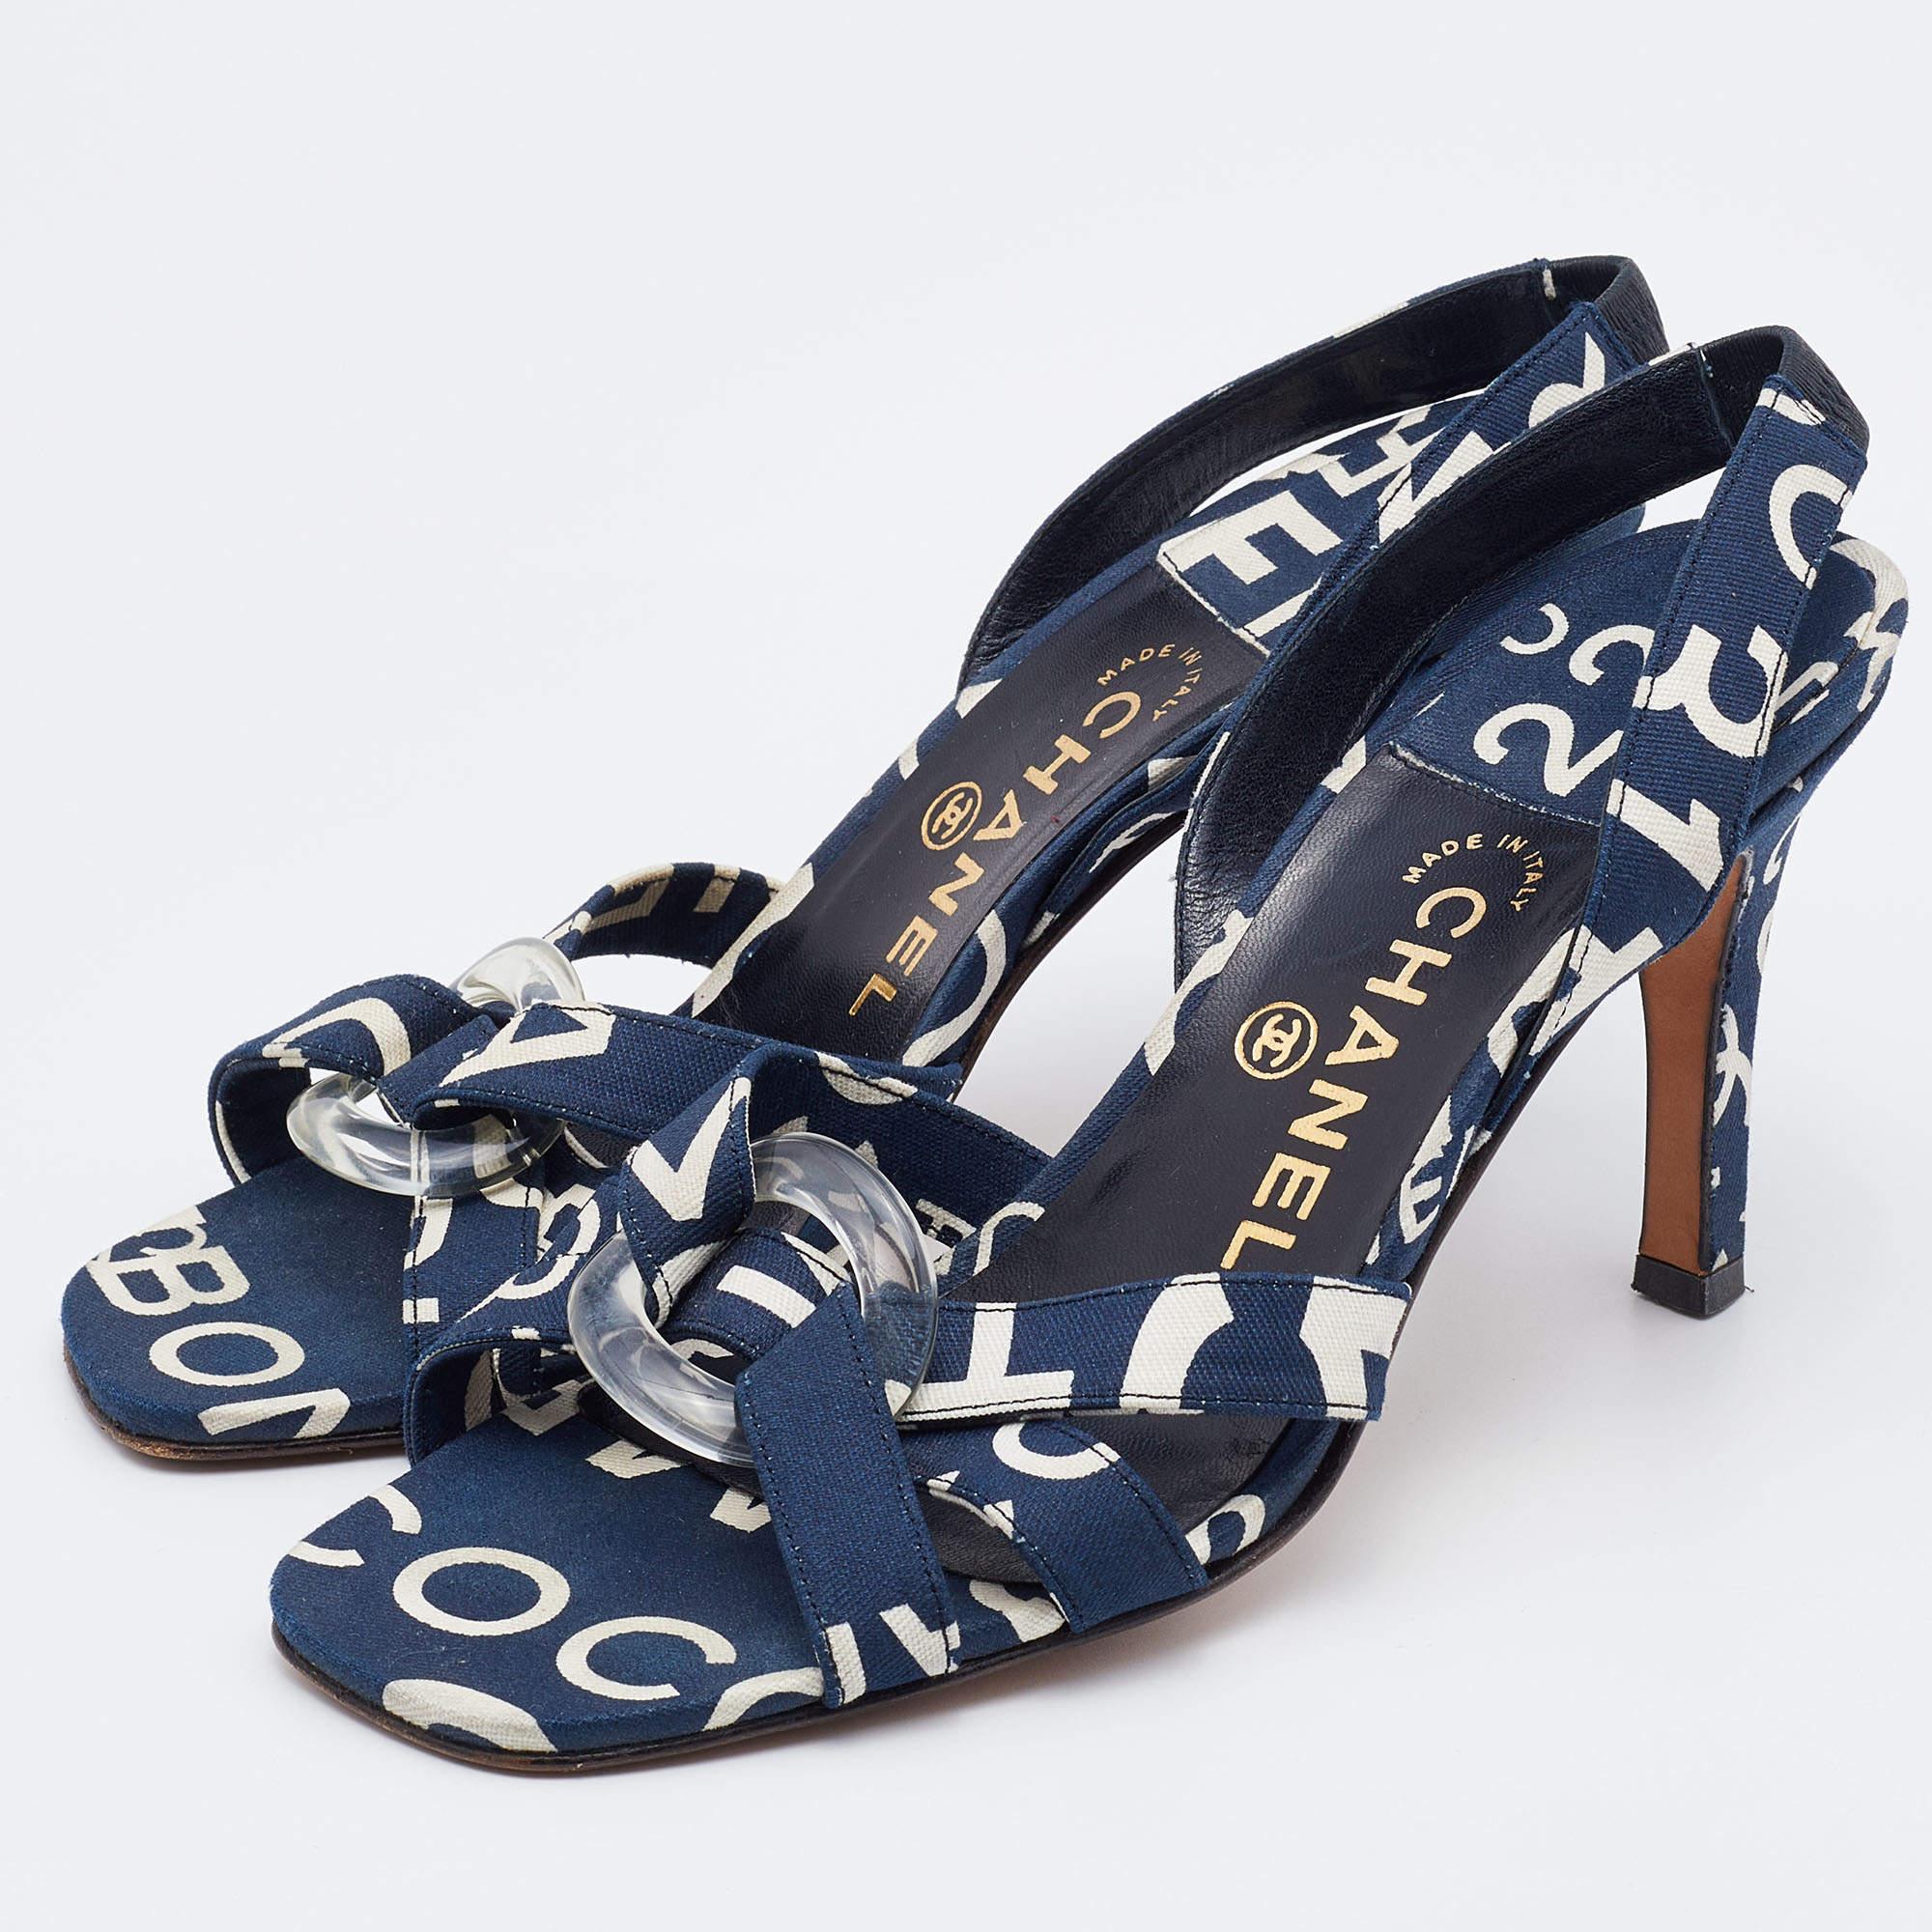 Women's Chanel Blue/White Printed Canvas Slingback Sandals Size 37